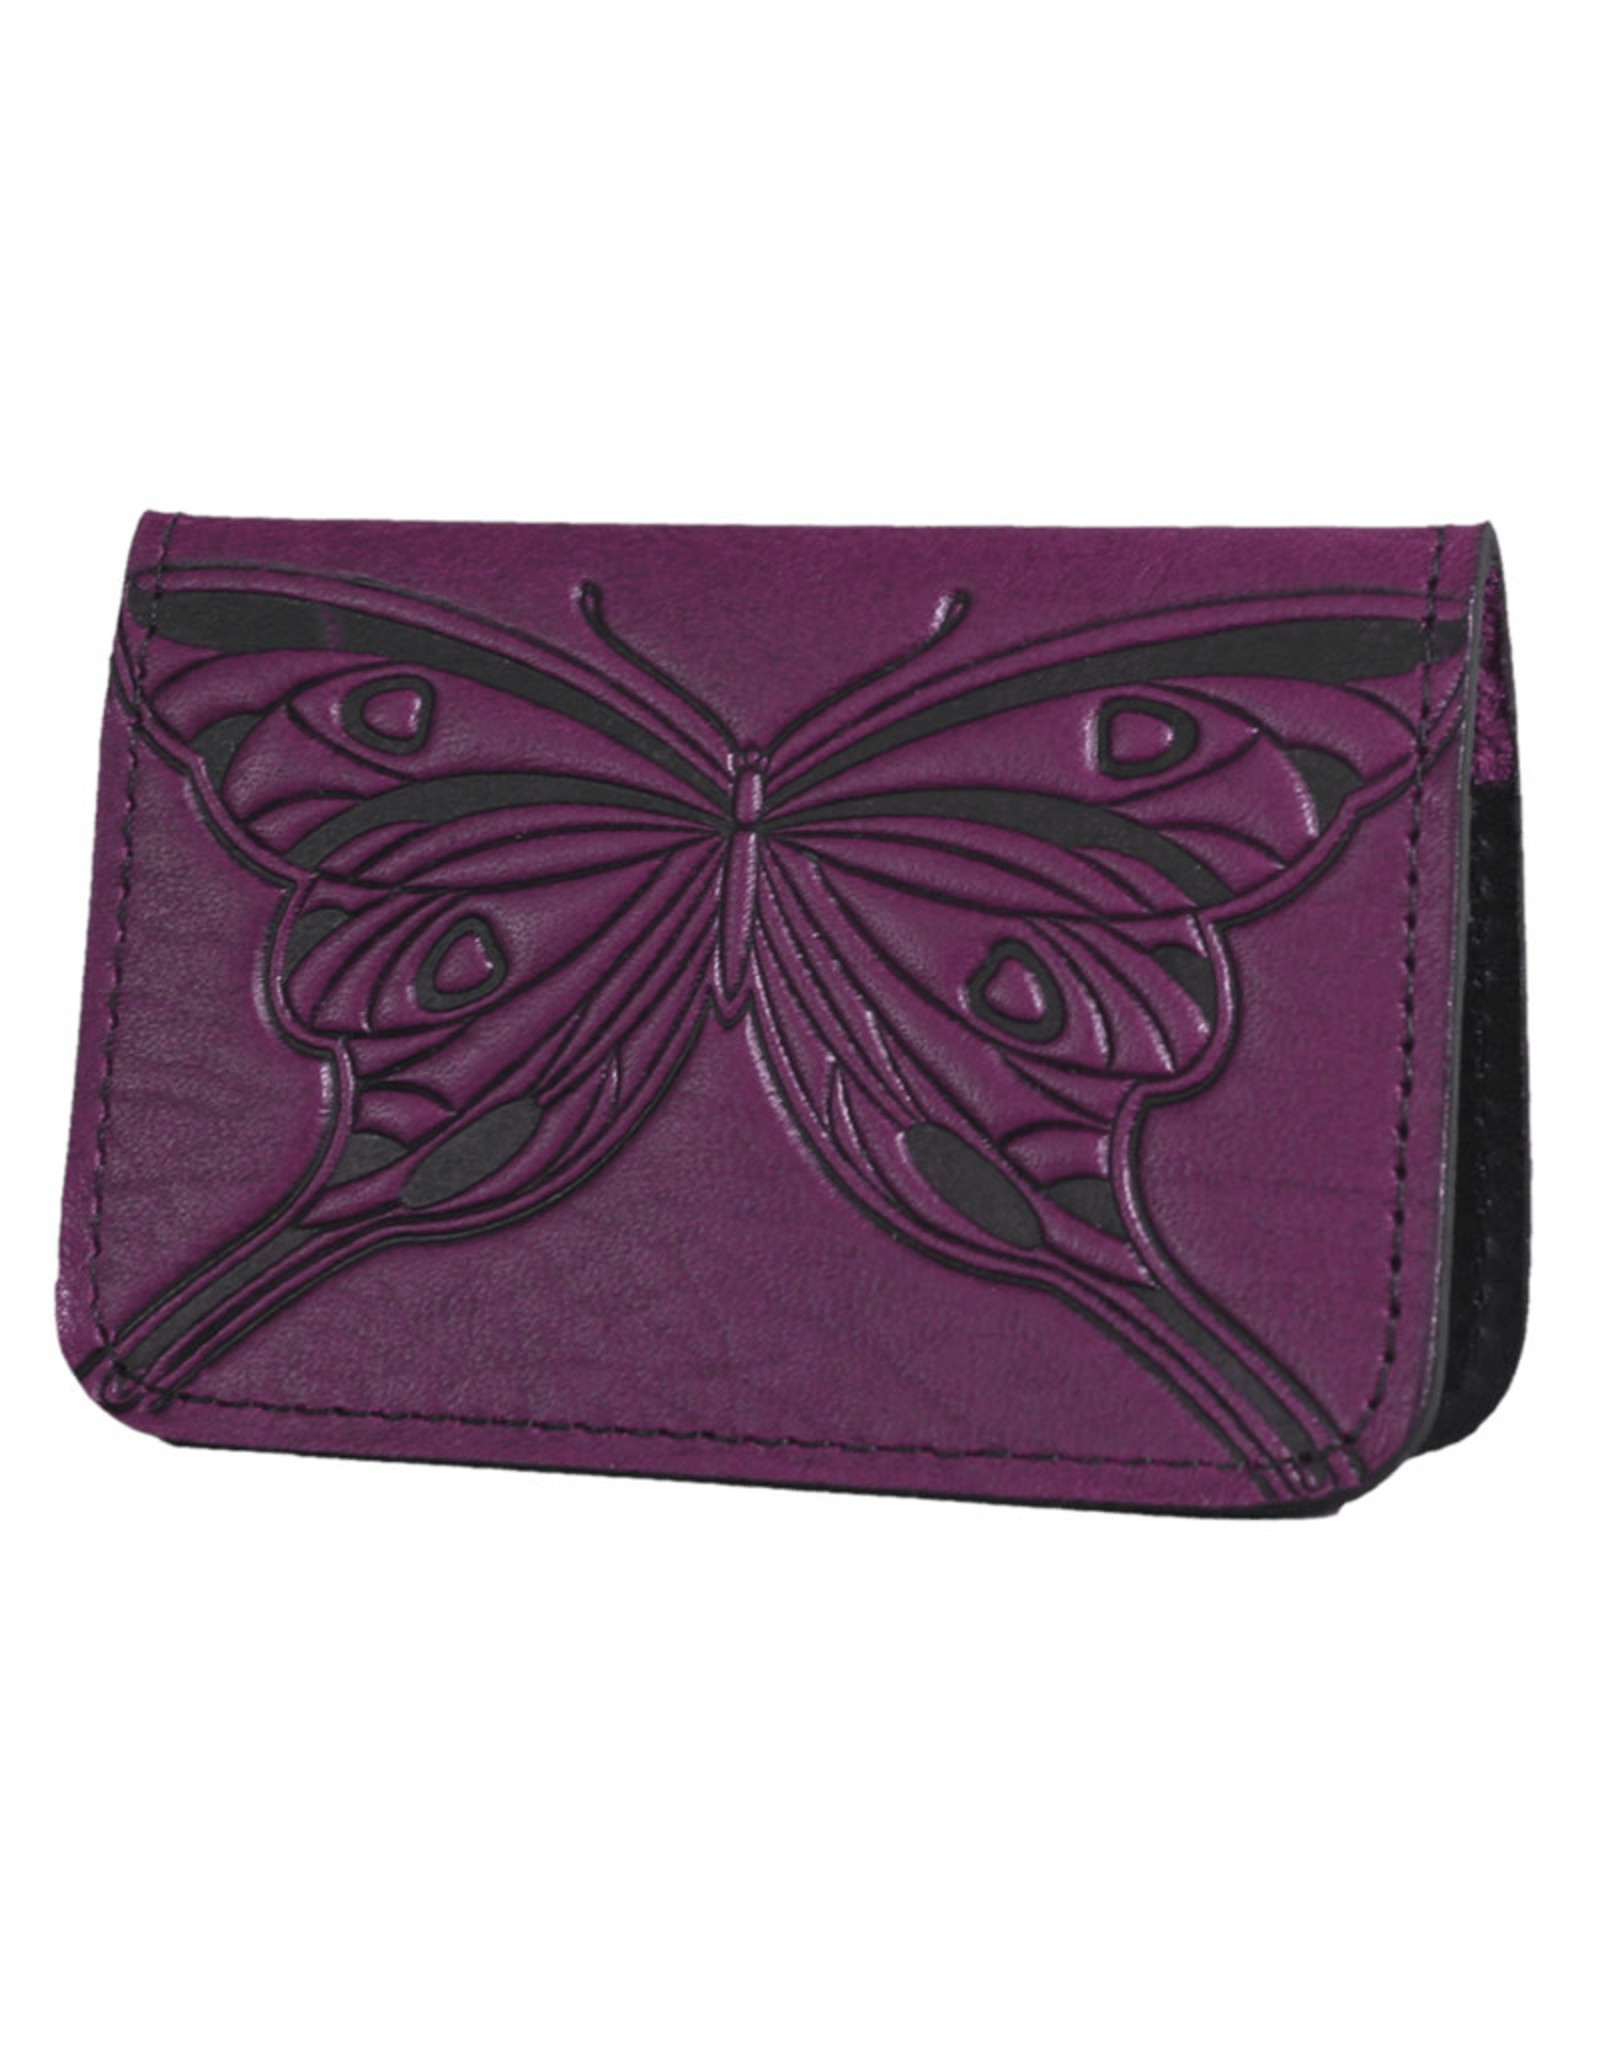 OBERON DESIGN BUTTERFLY CARD HOLDER (ORCHID)